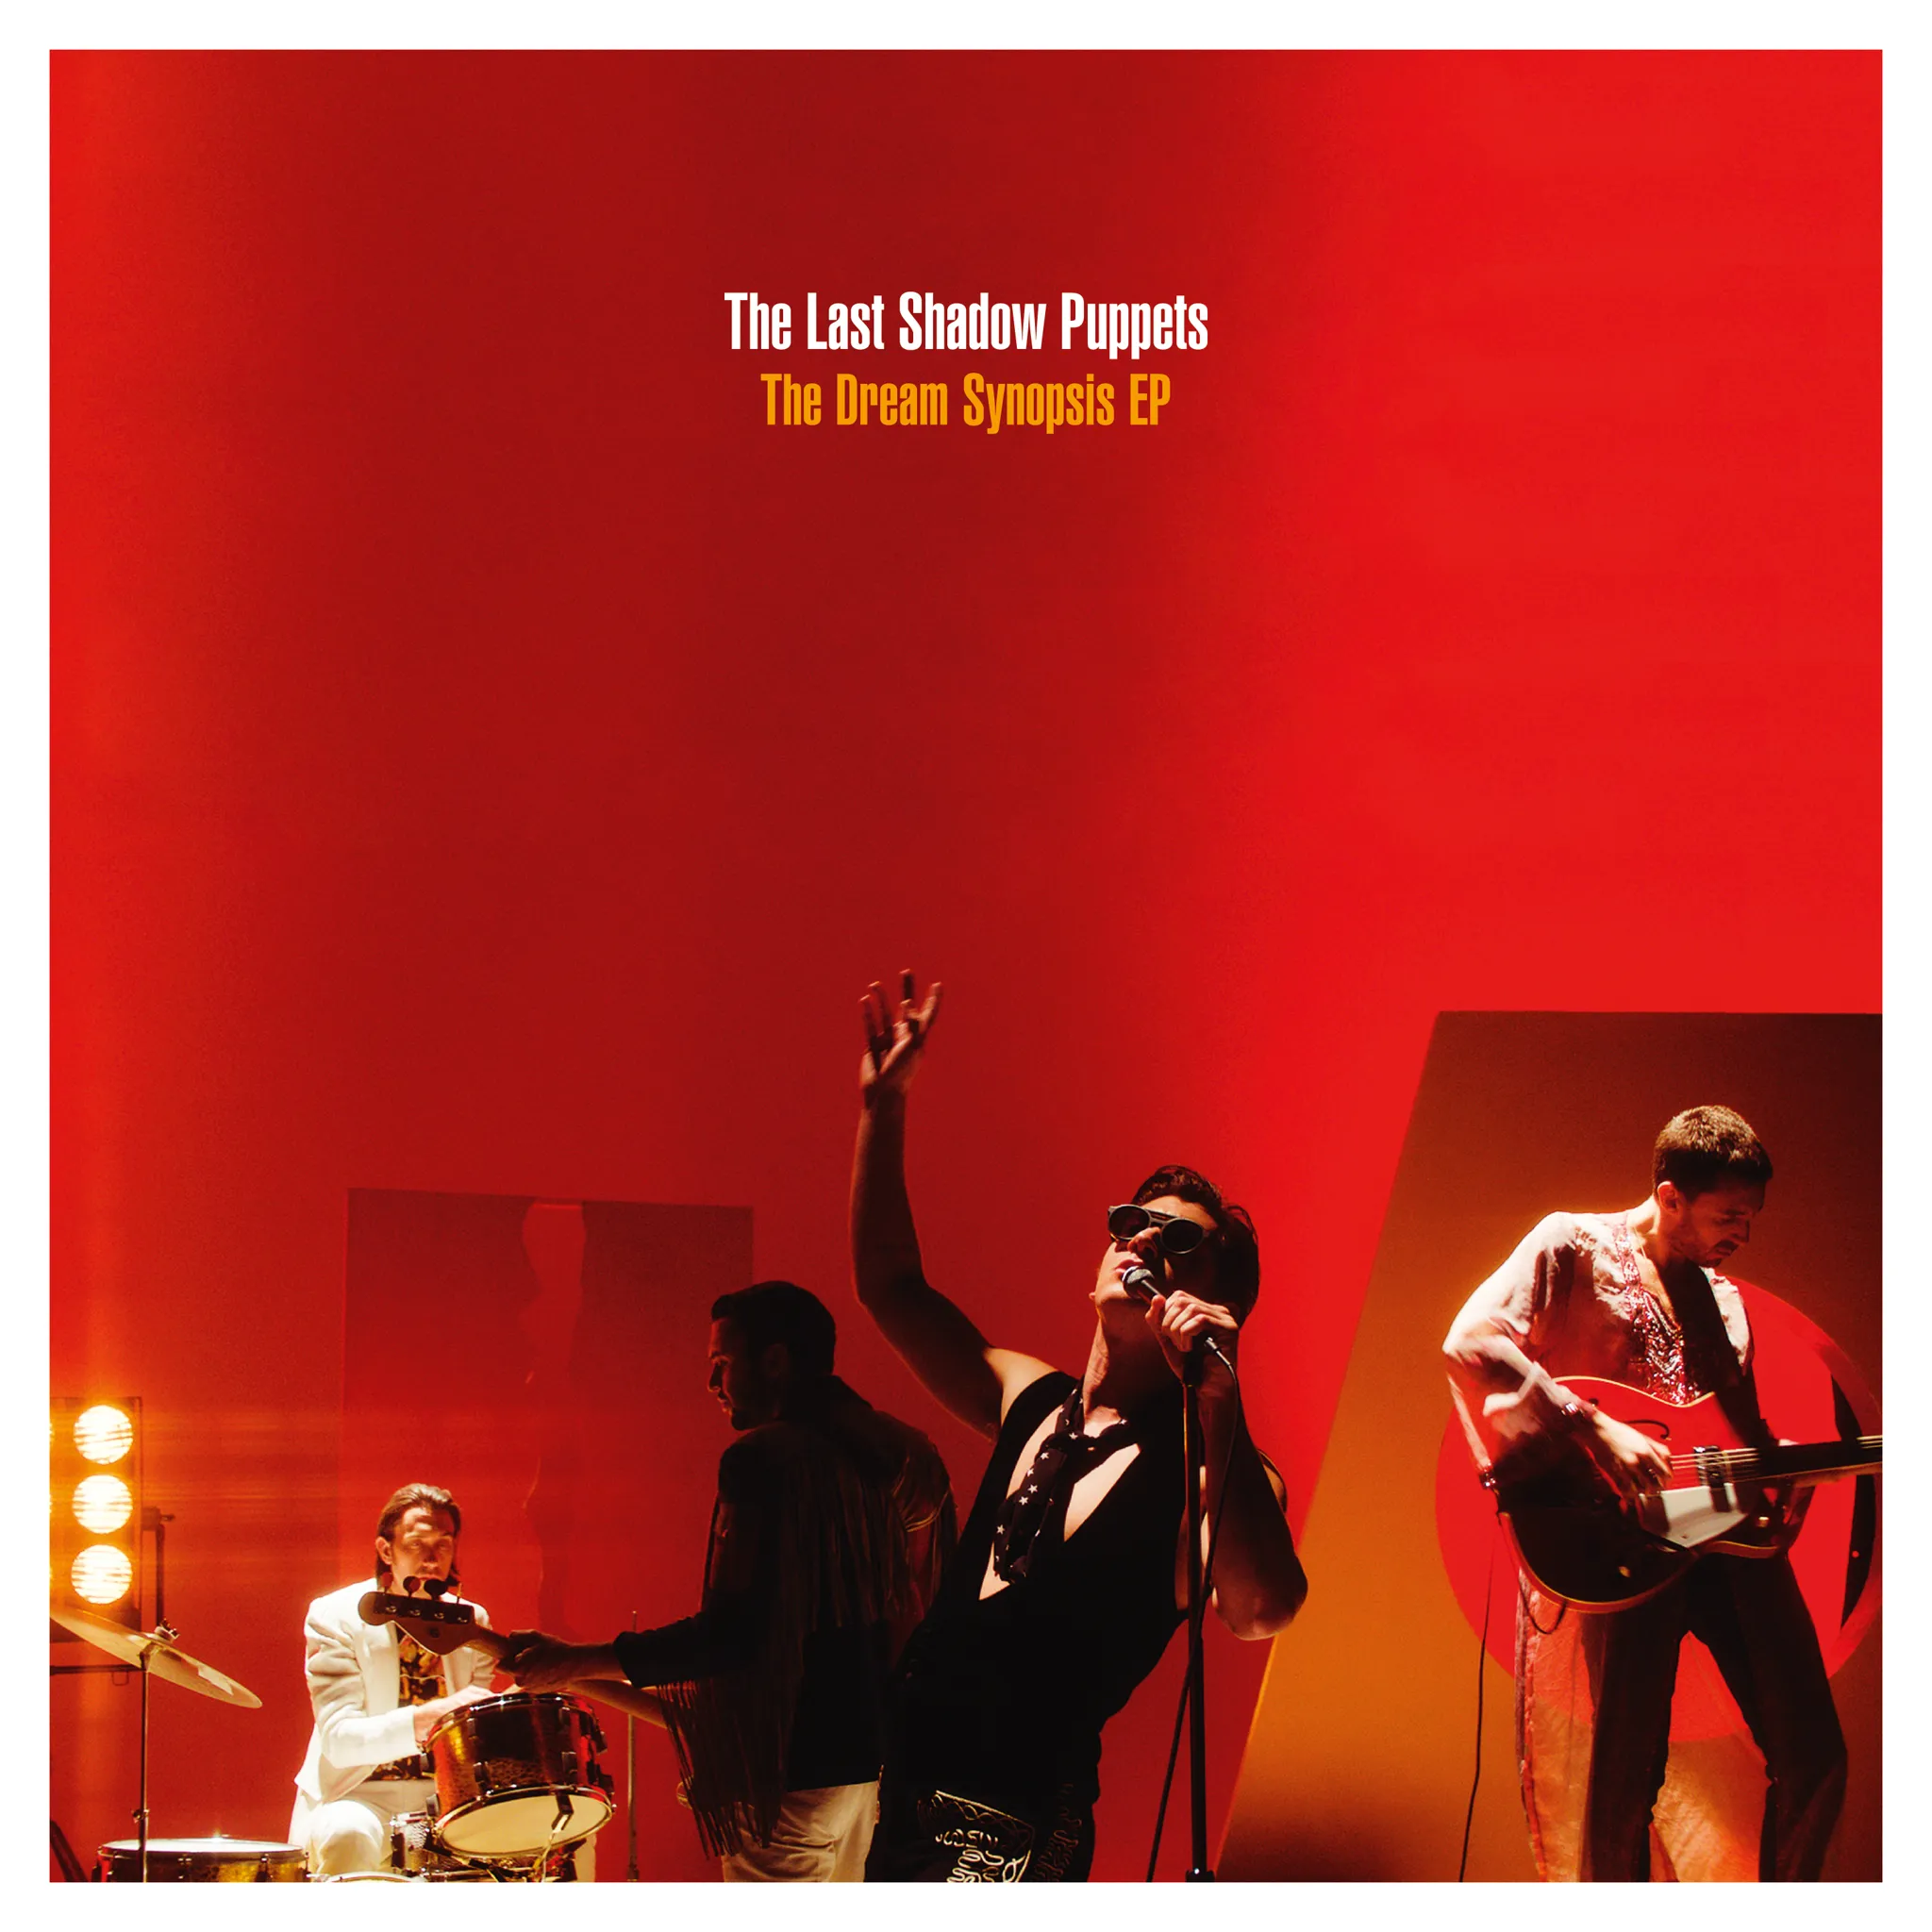 <strong>The Last Shadow Puppets - The Dream Synopsis EP</strong> (Cd)